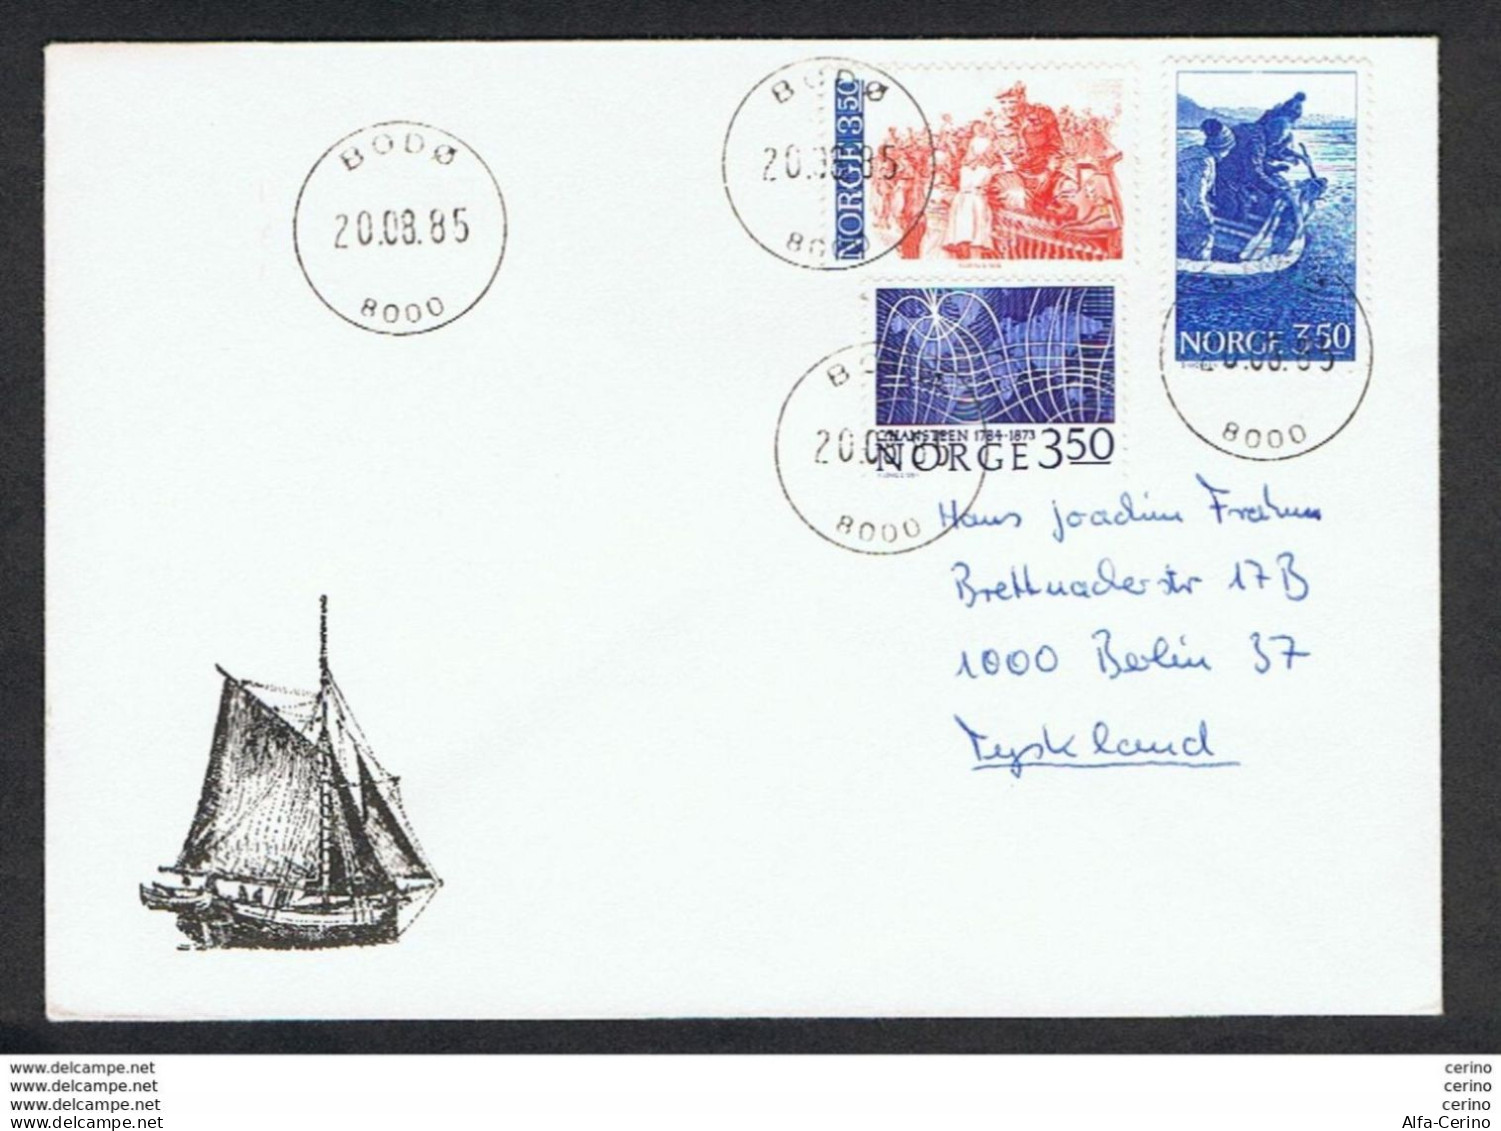 NORWAY: 20.08.1985 COVERT FROM BODO WITH:  3 K.50 + 3 K.50 + 3 K.50 (857 + 858 + 876) - TO GERMANY - Storia Postale